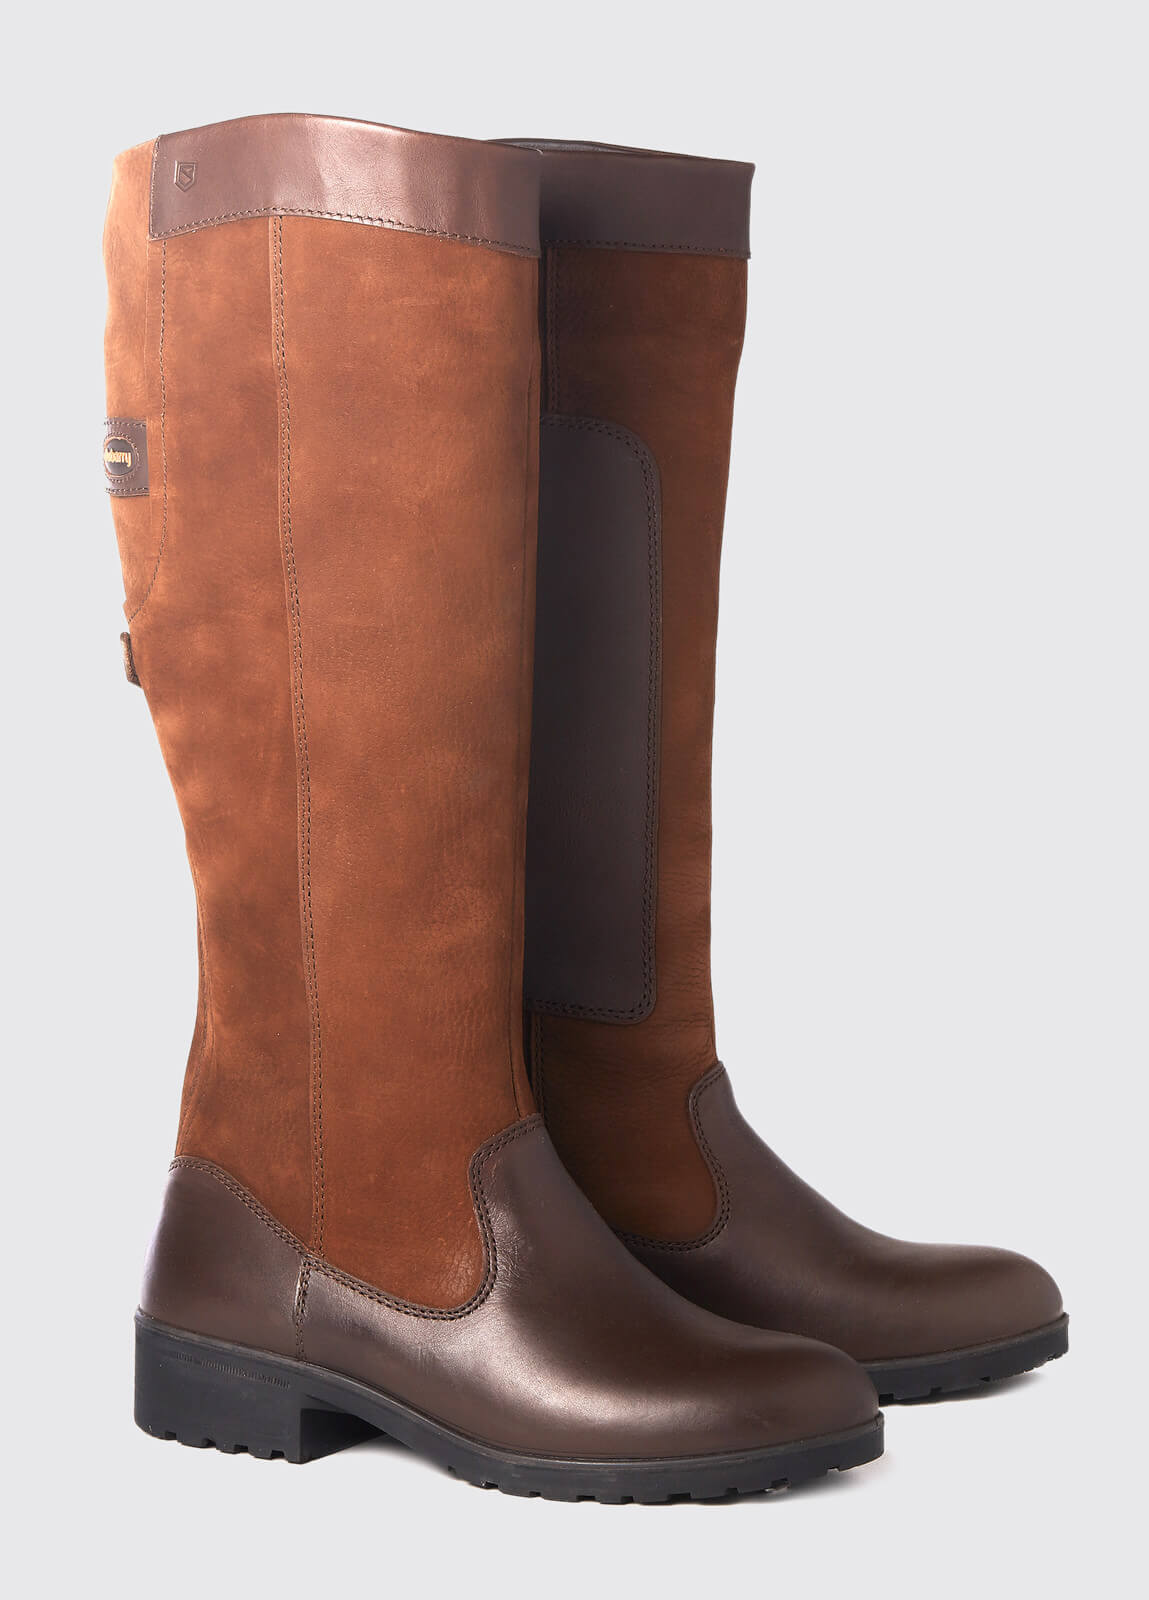 A pair of walnut brown Dubarry Clare leather country boots, knee high length with leather protection pad on inside leg